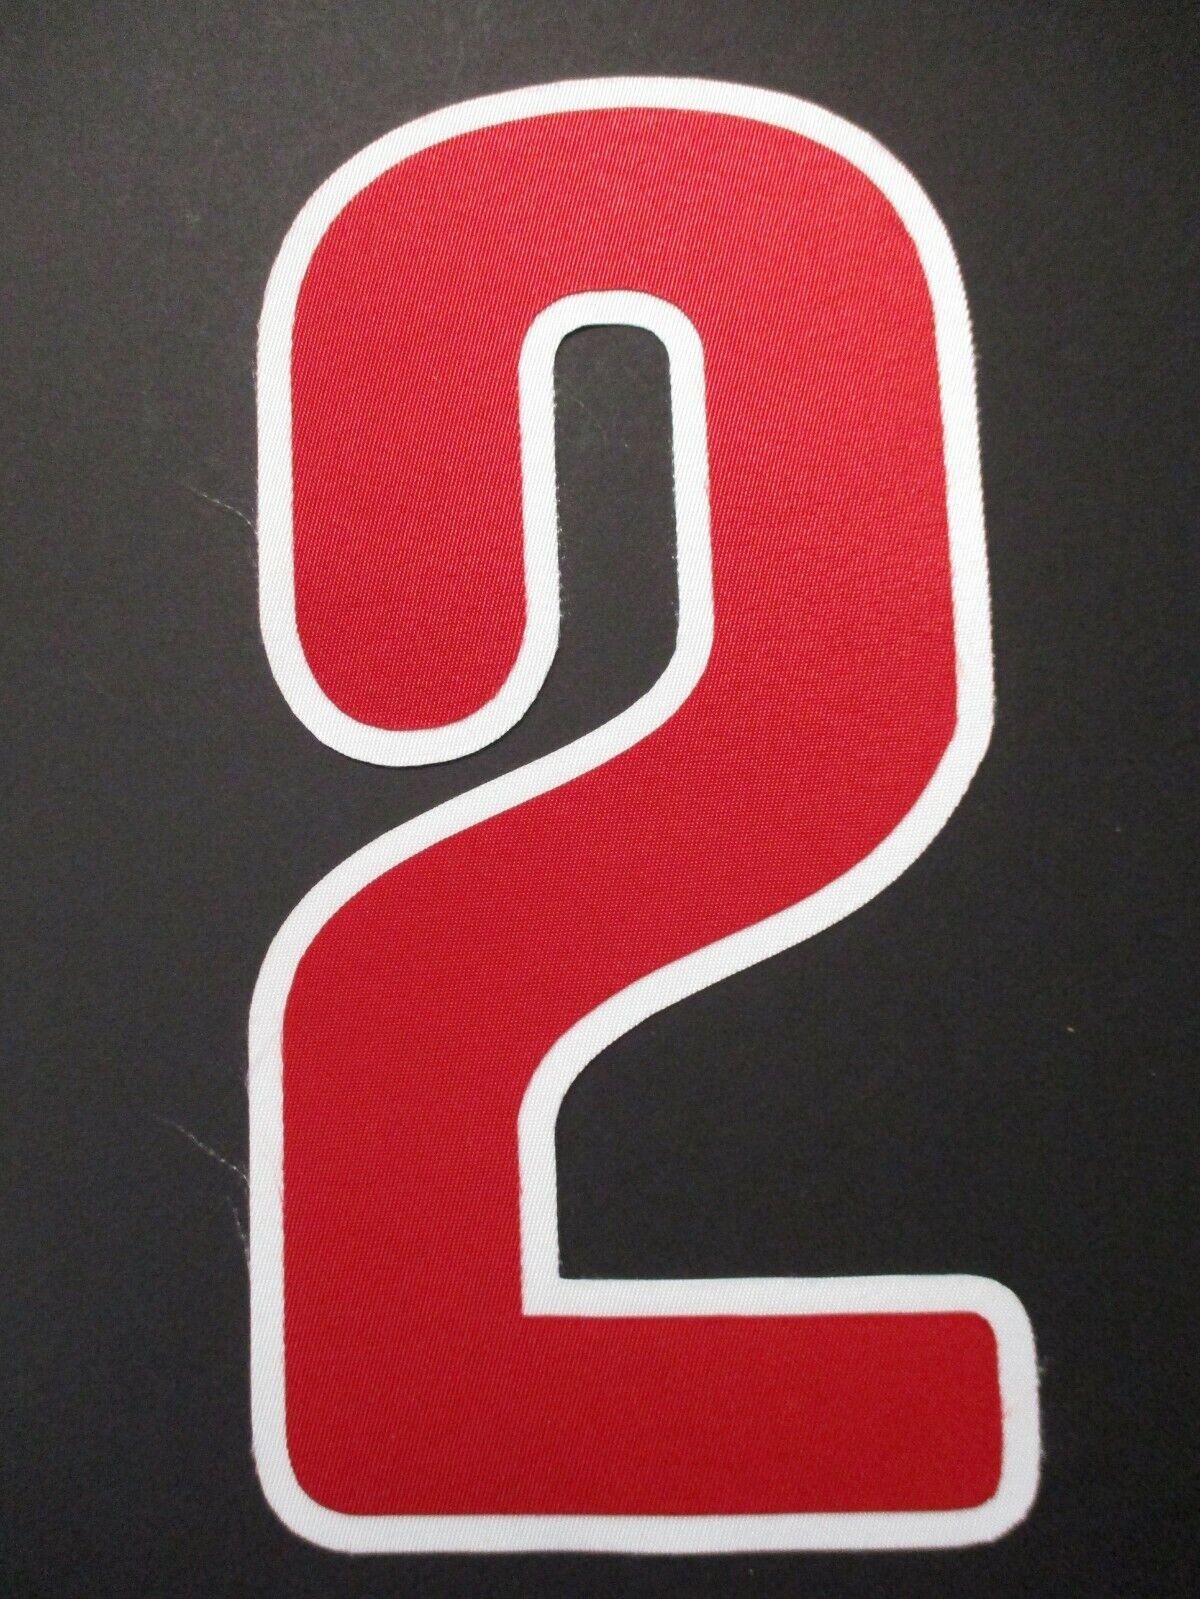 Philadelphia Phillies Number Kit Jersey Red Number 2 Patch 4 x 8 Inches